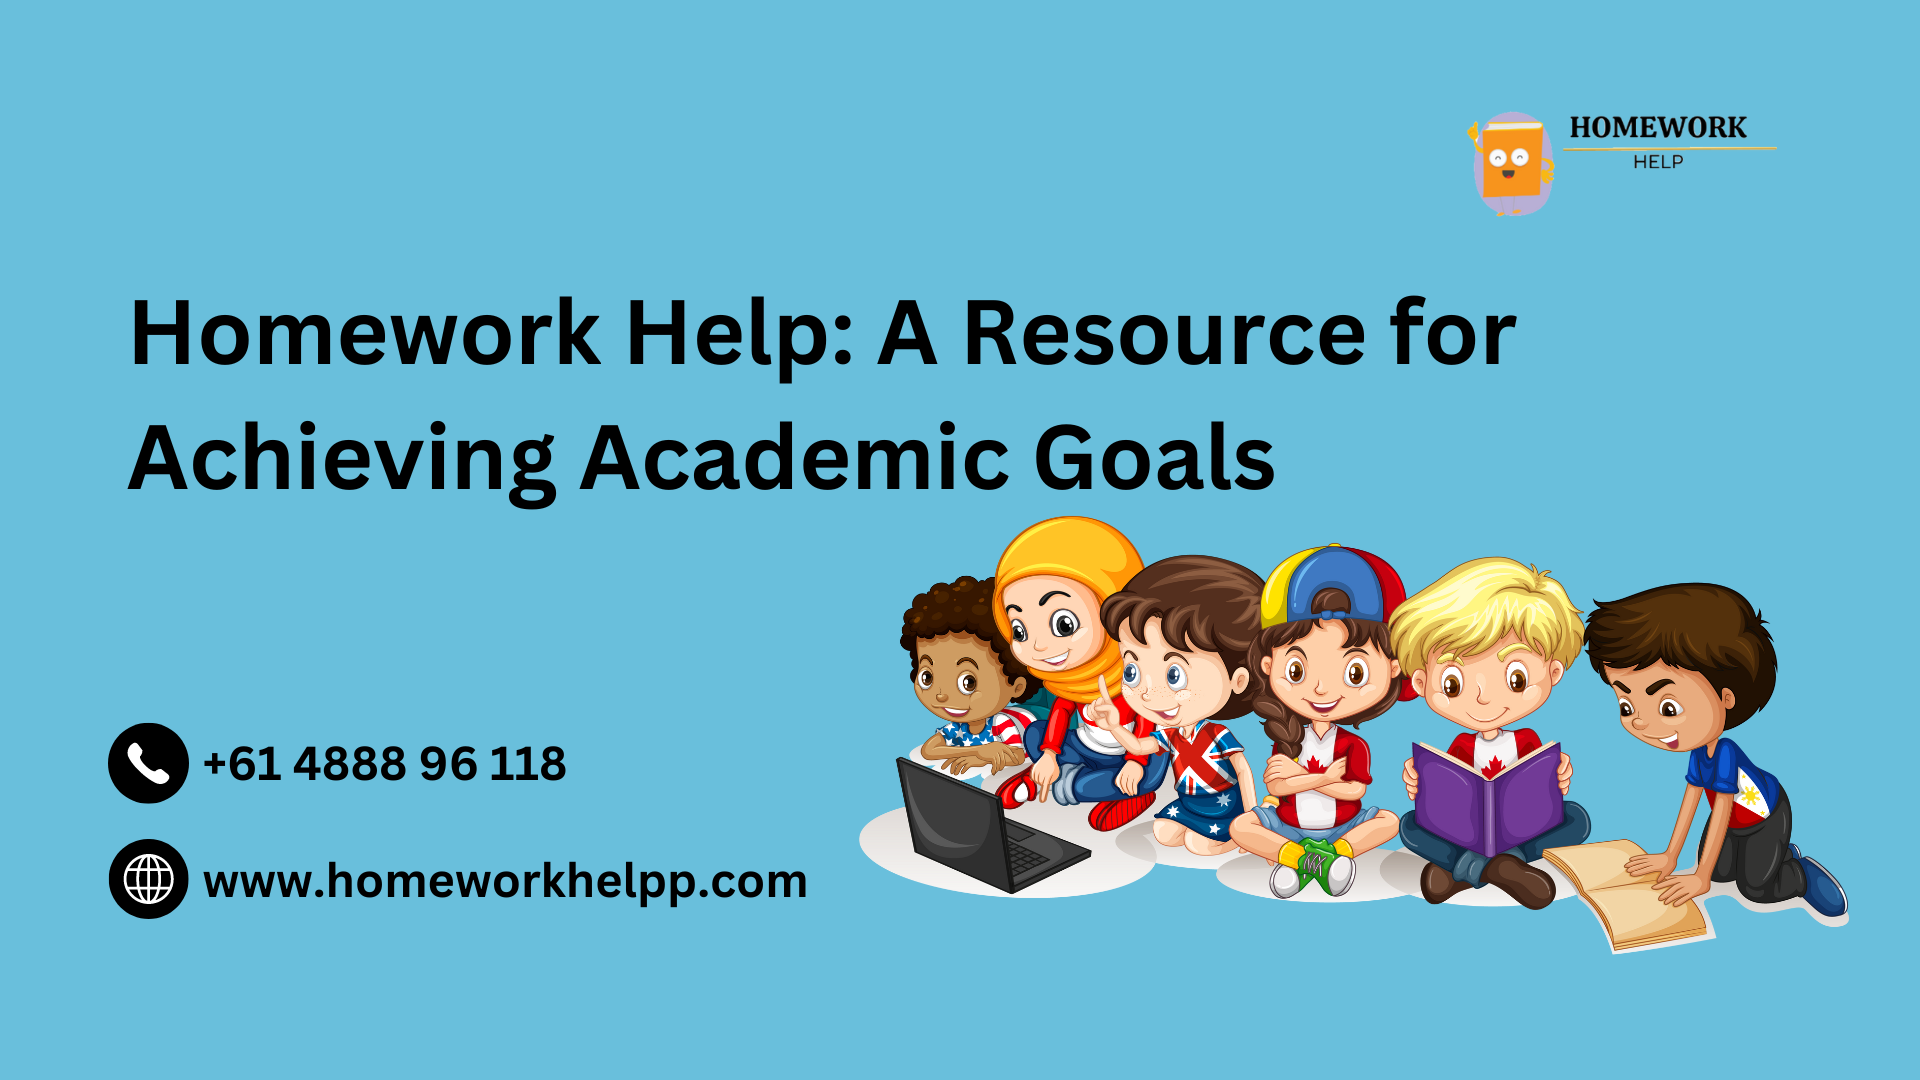 Homework Help: A Resource for Achieving Academic Goals